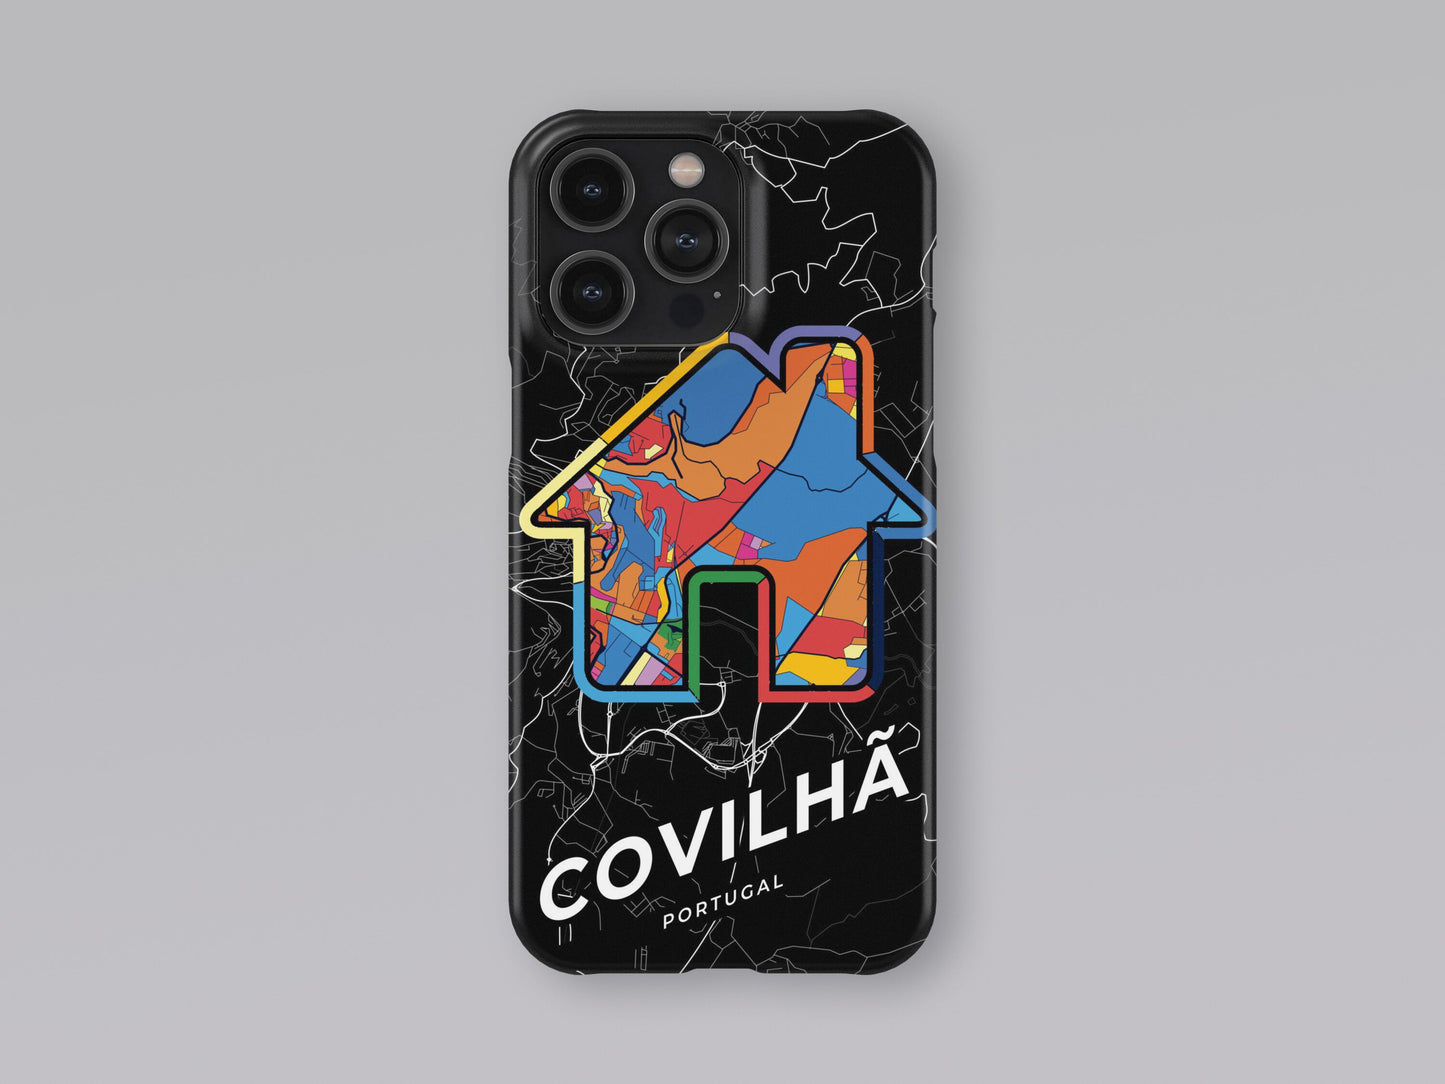 Covilhã Portugal slim phone case with colorful icon. Birthday, wedding or housewarming gift. Couple match cases. 3